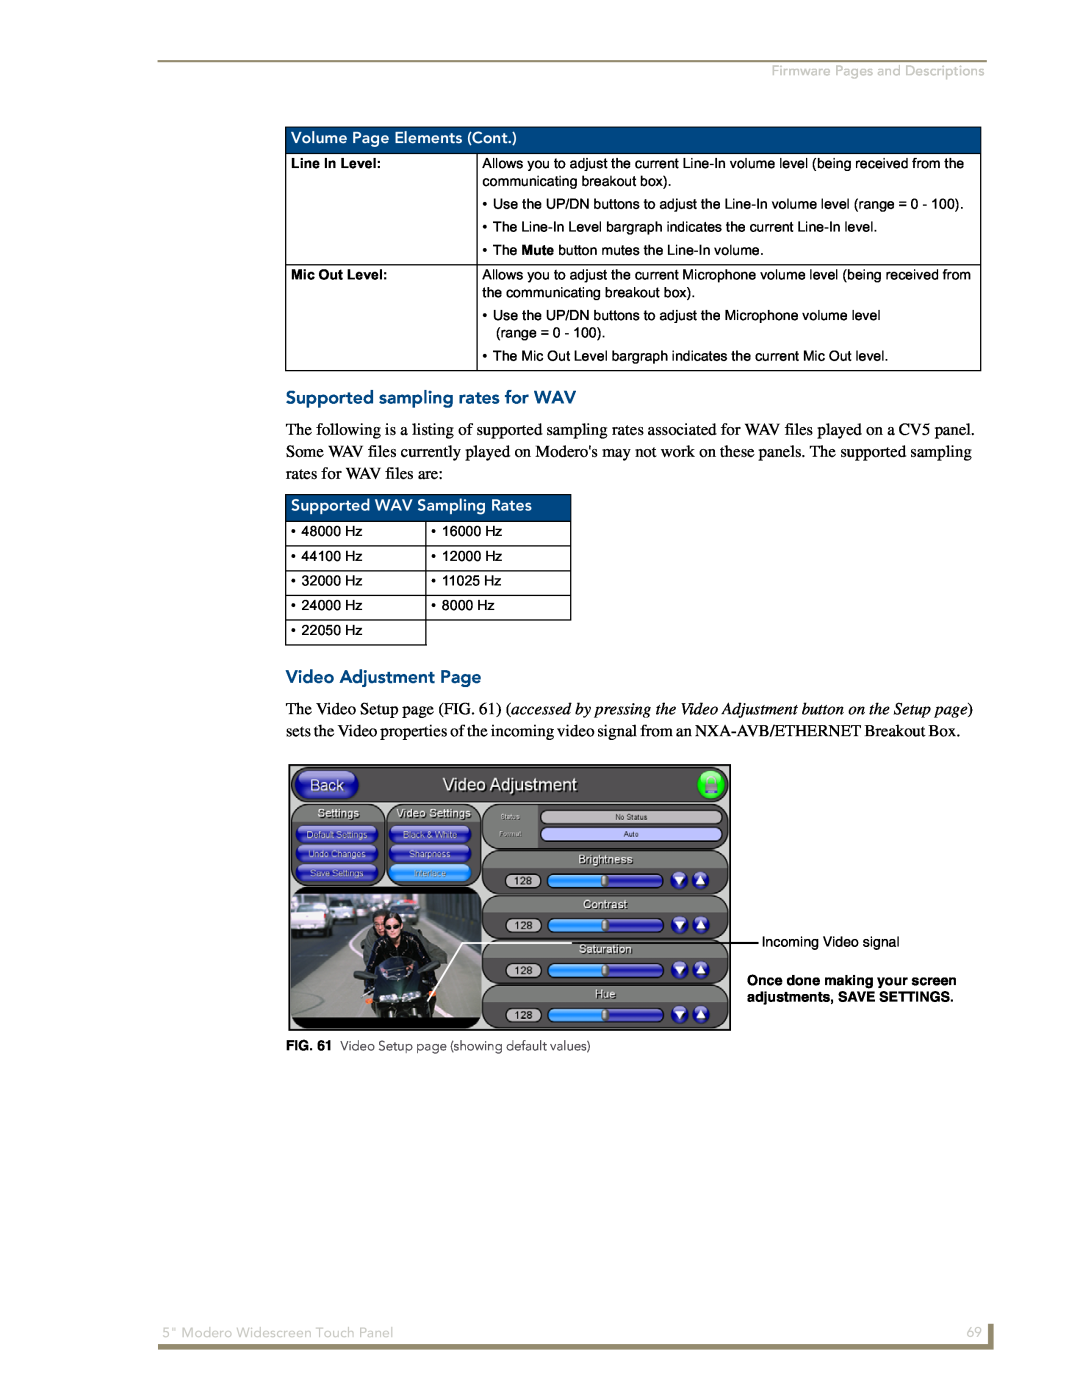 AMX NXD-CV5 manual Supported sampling rates for WAV, Video Adjustment Page, Volume Page Elements Cont, Line In Level 